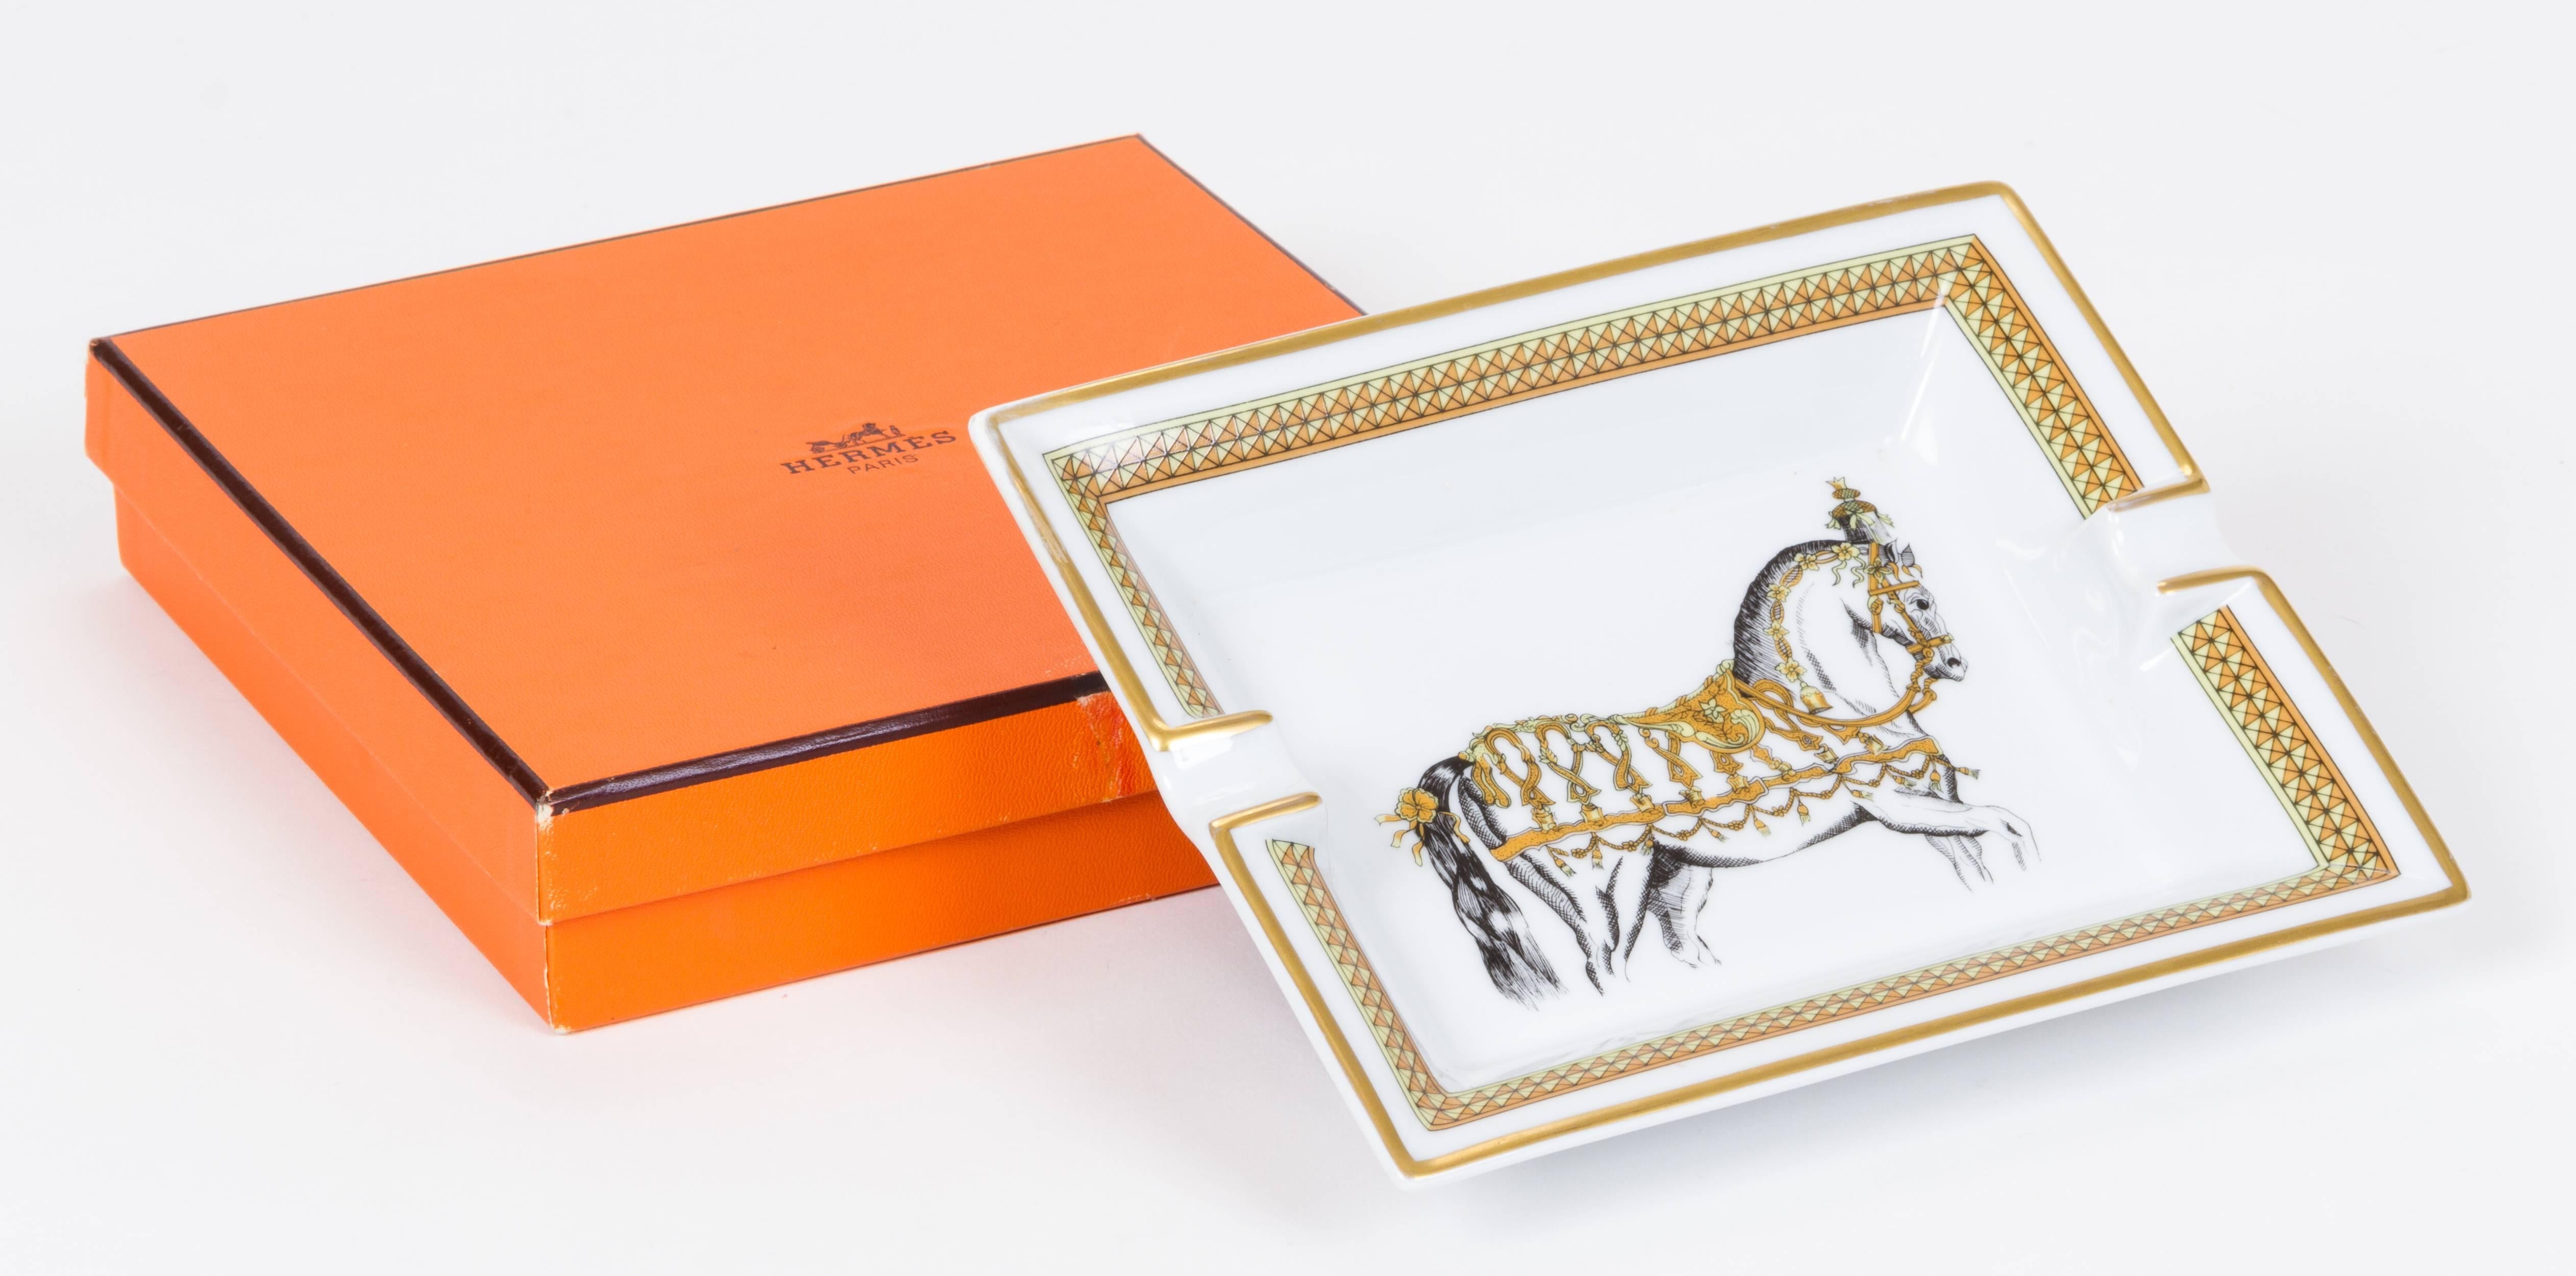 Hermès porcelain ashtray with horse design. Made in France. Minor wear. Comes with original box.